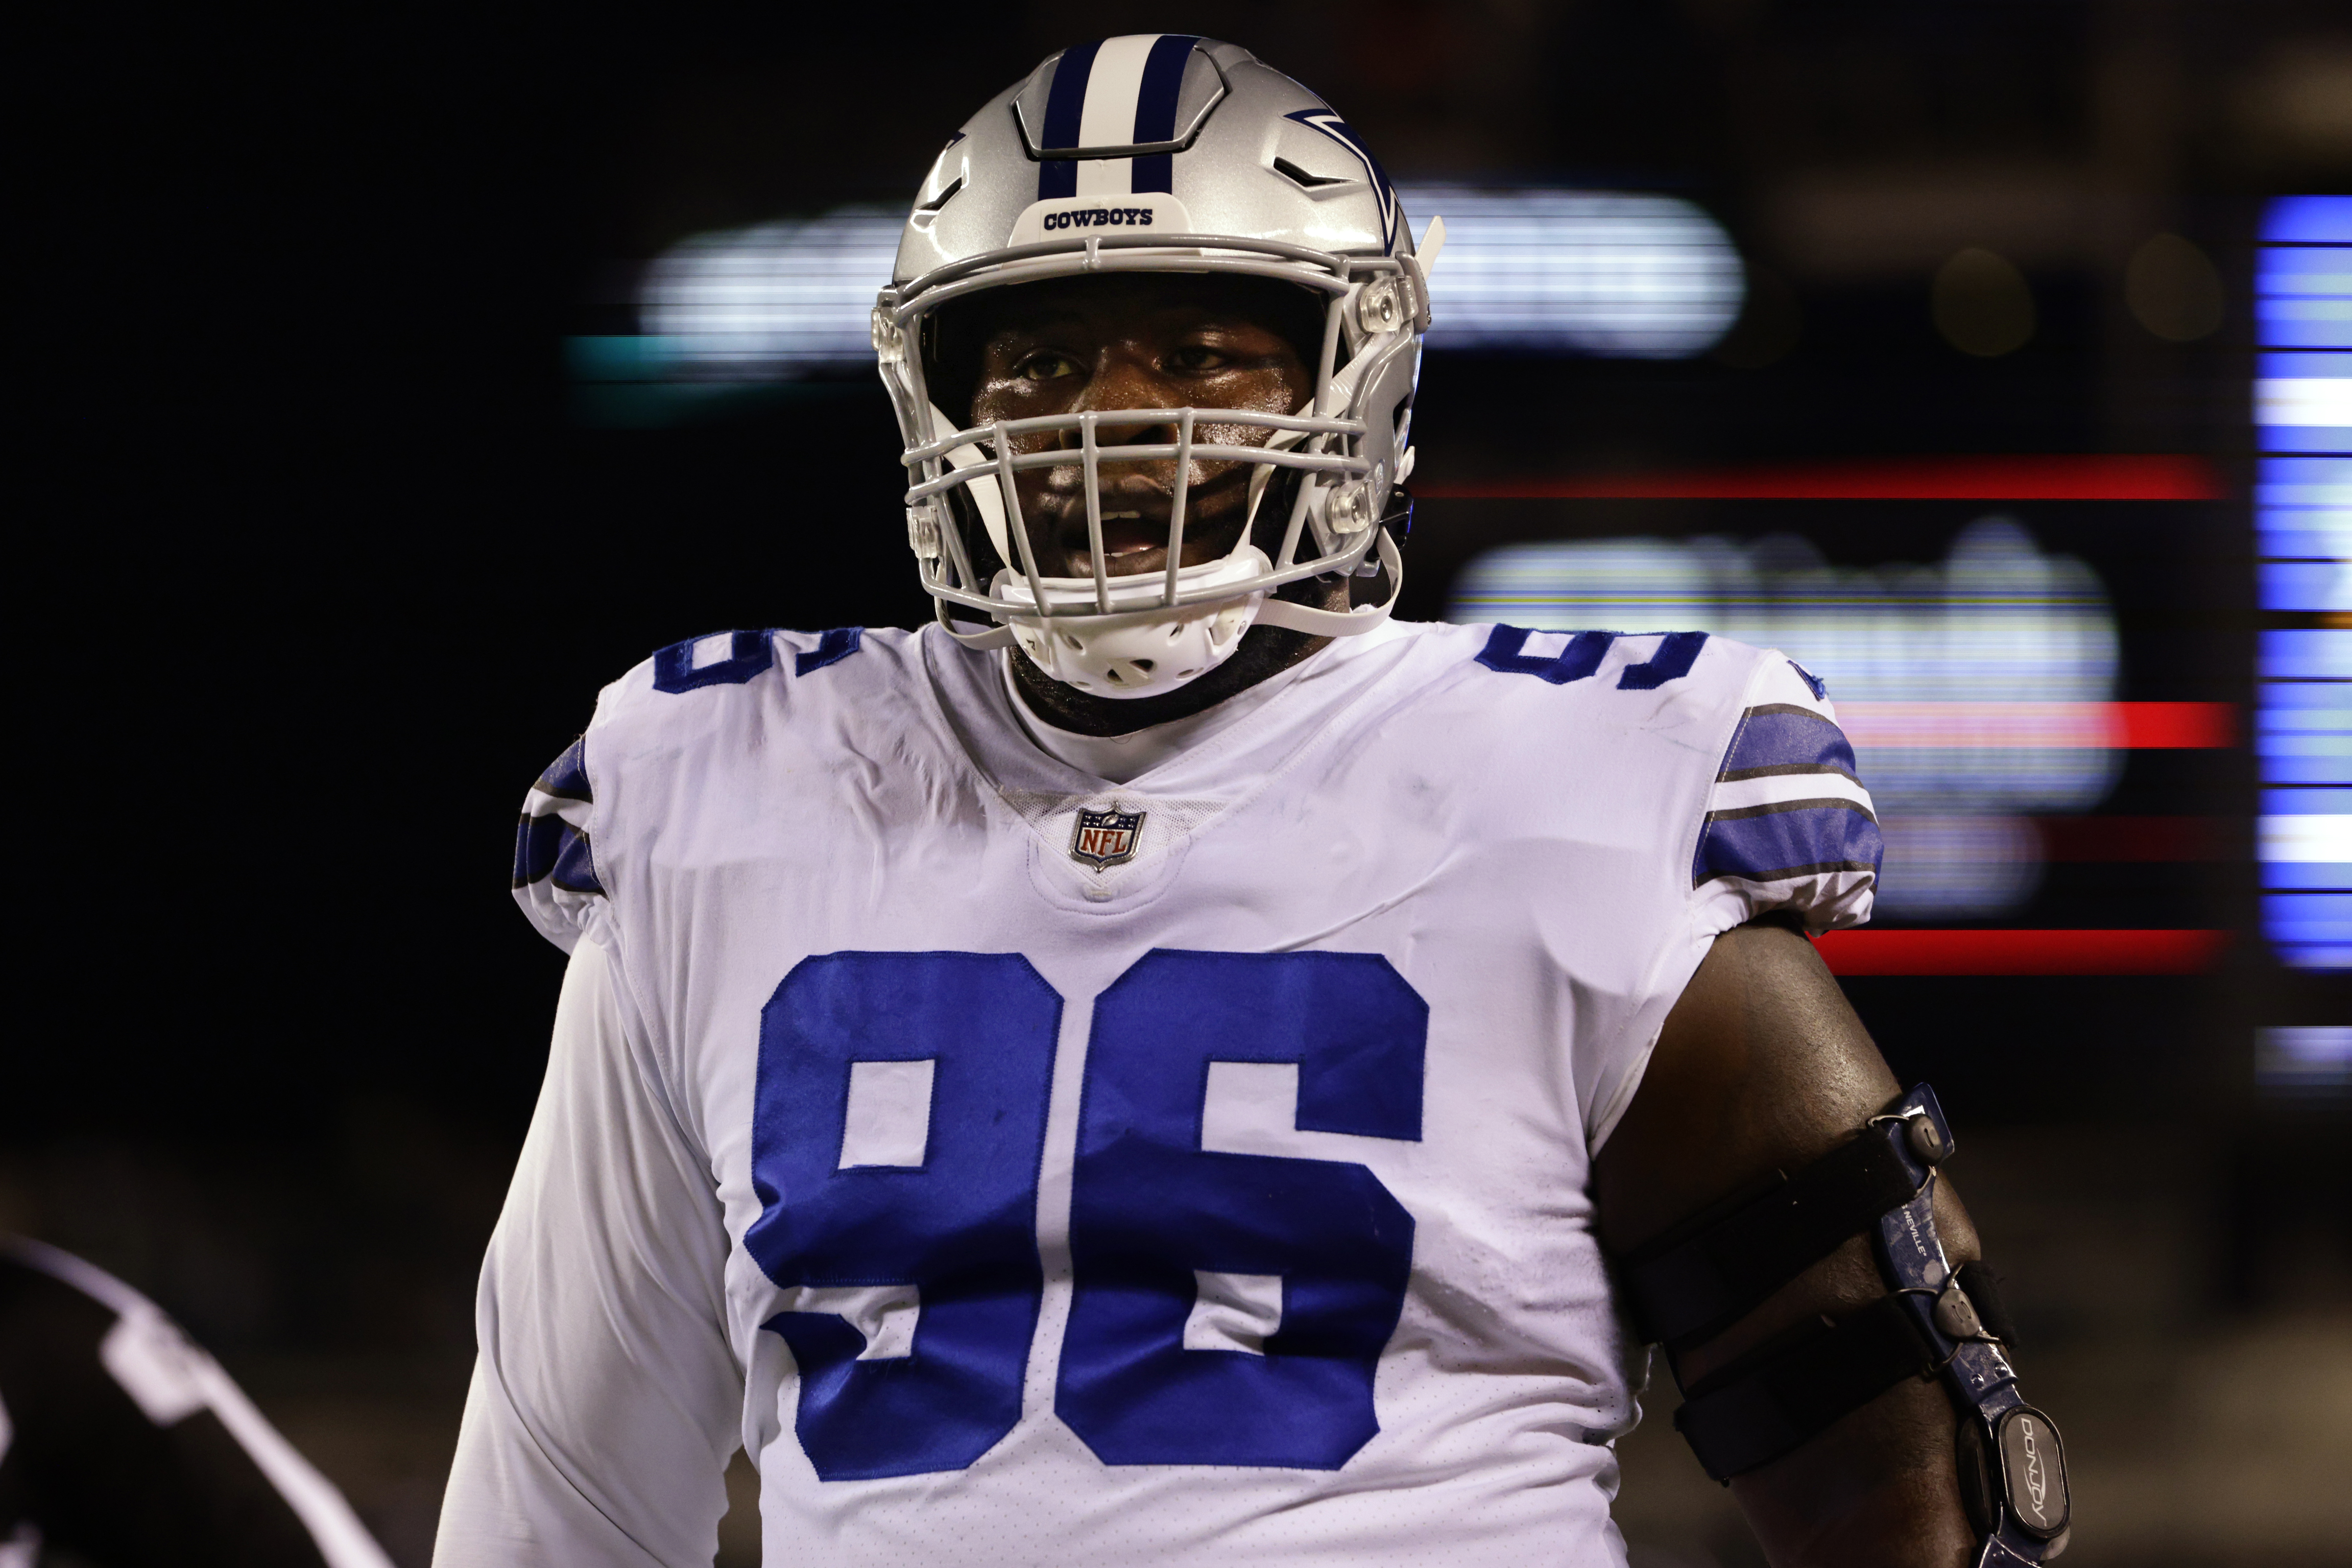 5 quick facts about new Cowboys DT Neville Gallimore